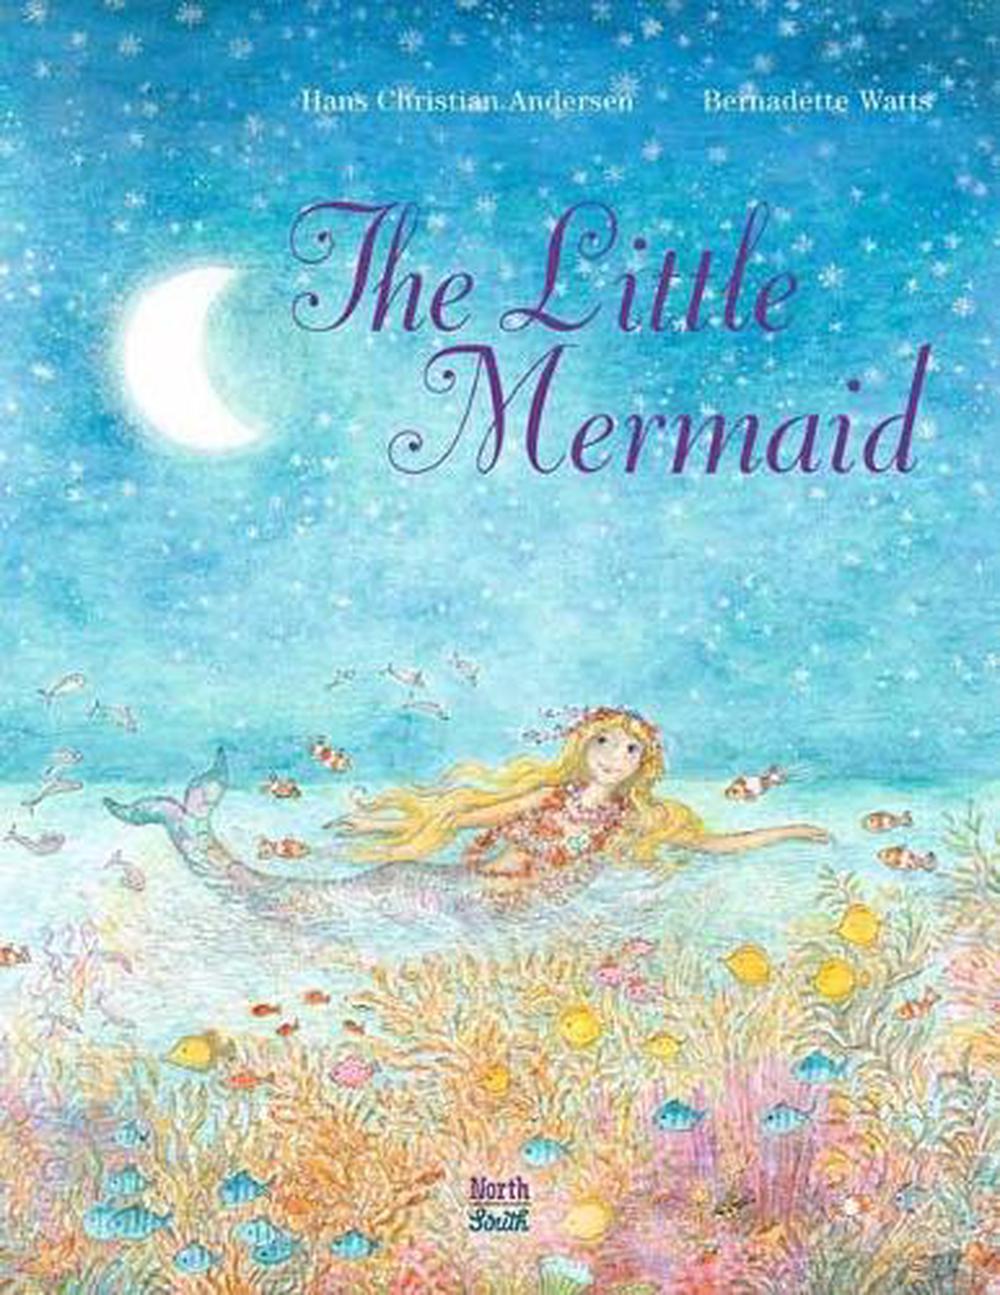 The Little Mermaid and Other Fairy Tales by Hans Christian Andersen